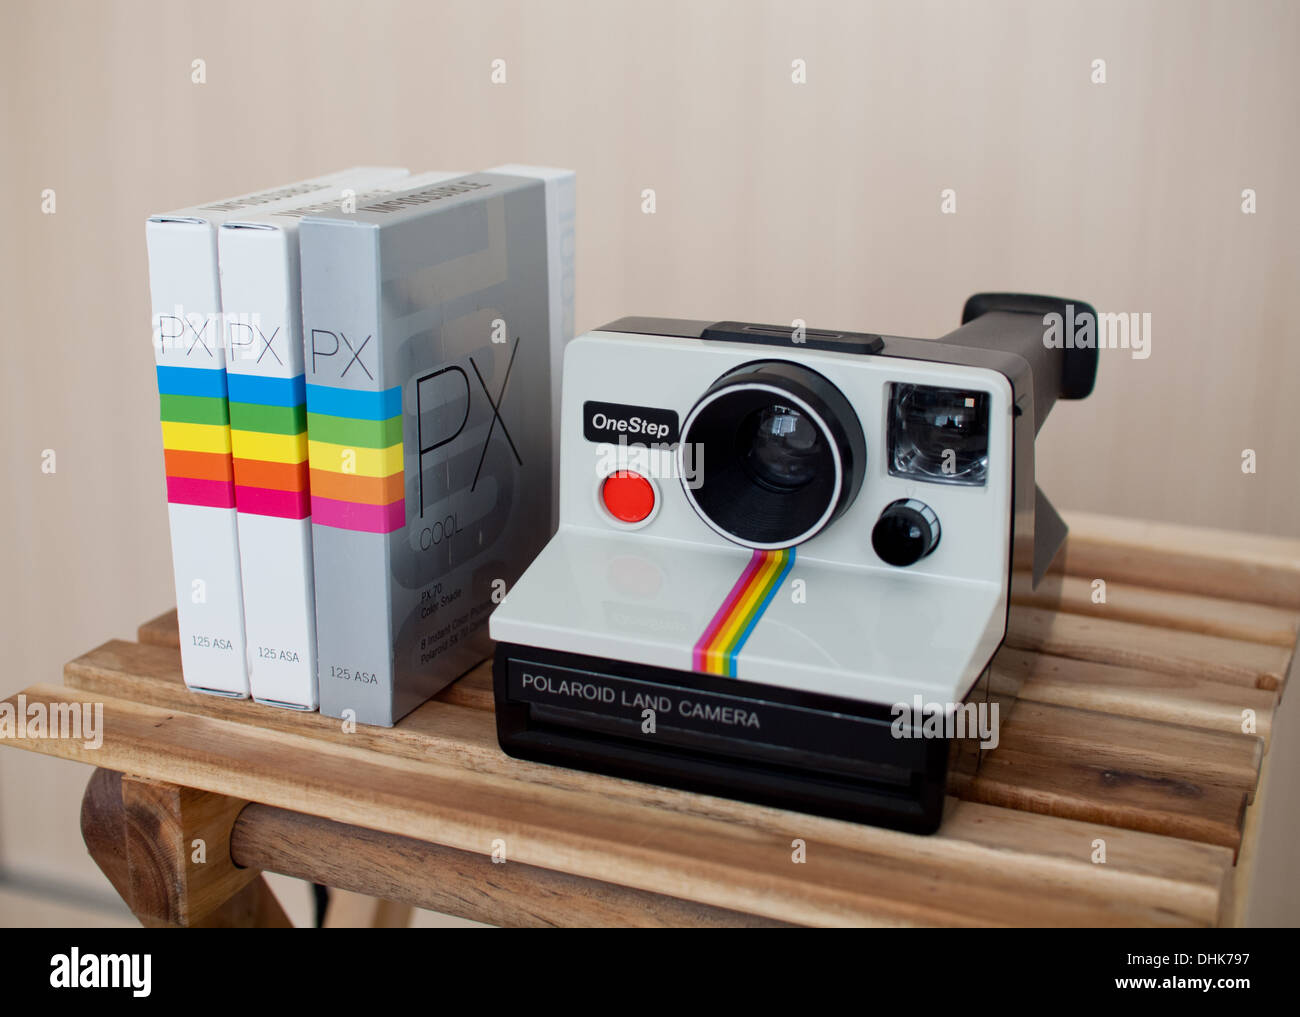 A Polaroid SX-70 OneStep instant camera and Impossible Project